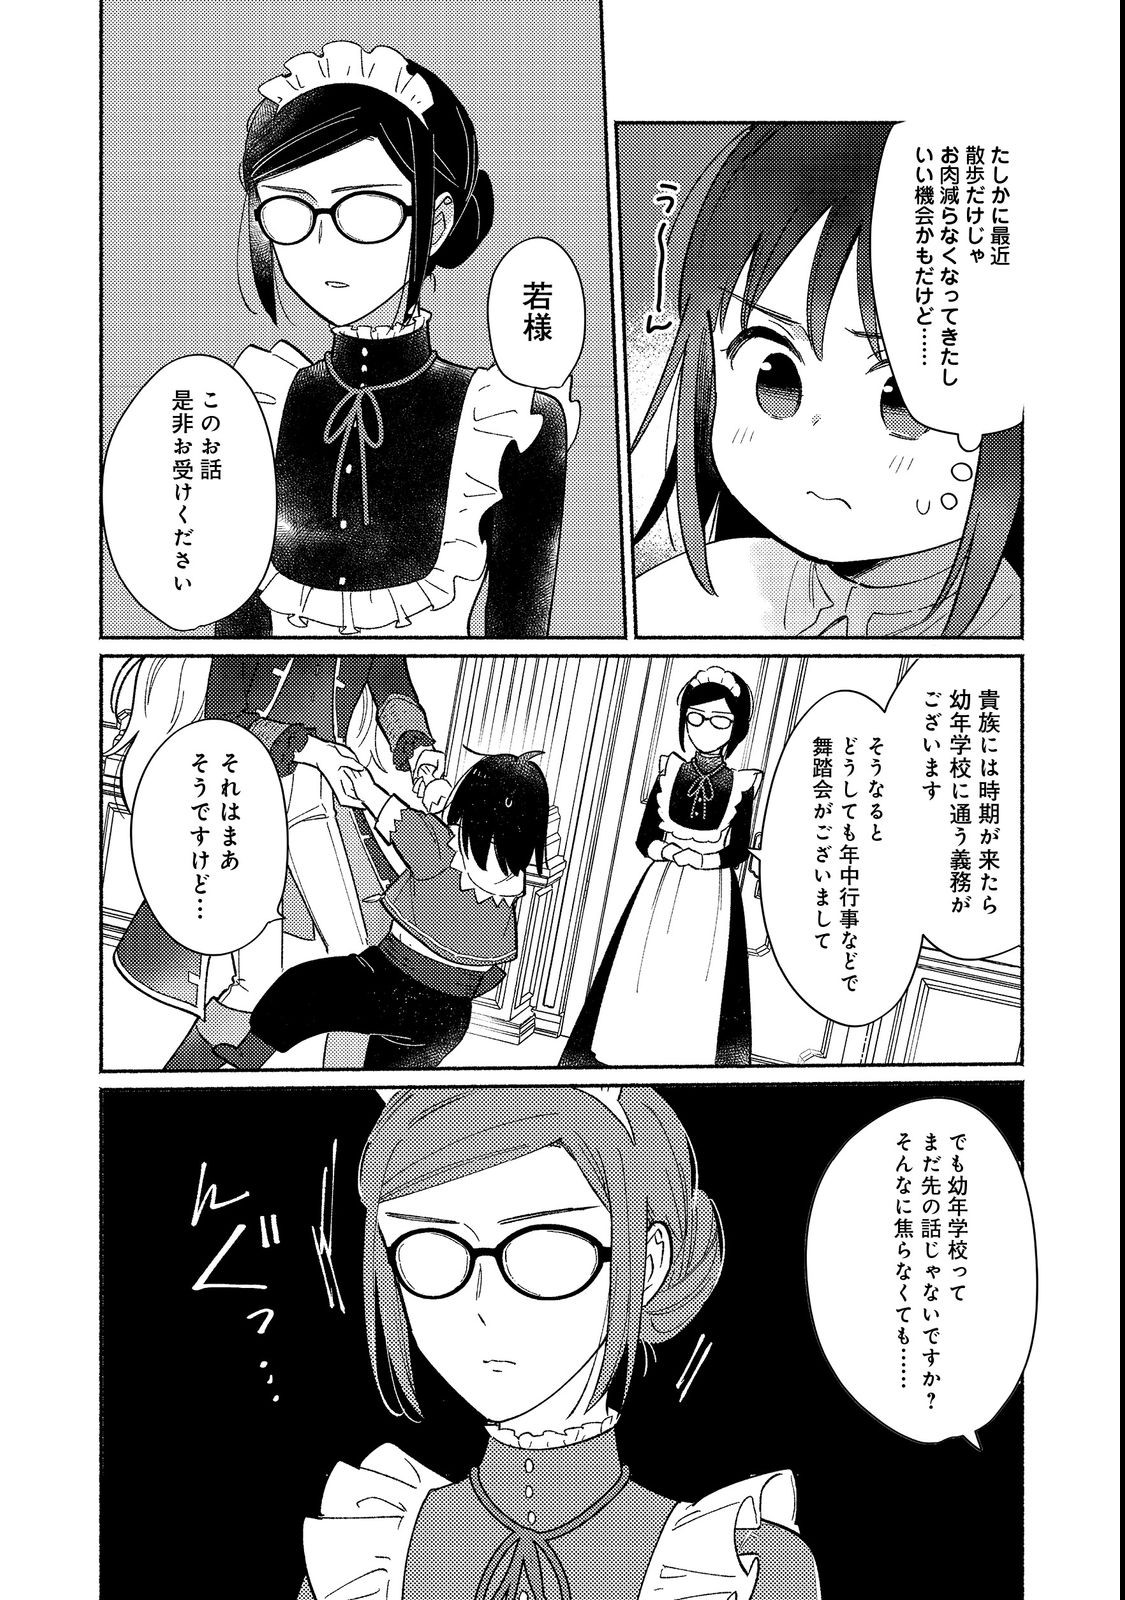 I’m the White Pig Nobleman 第17.2話 - Page 1